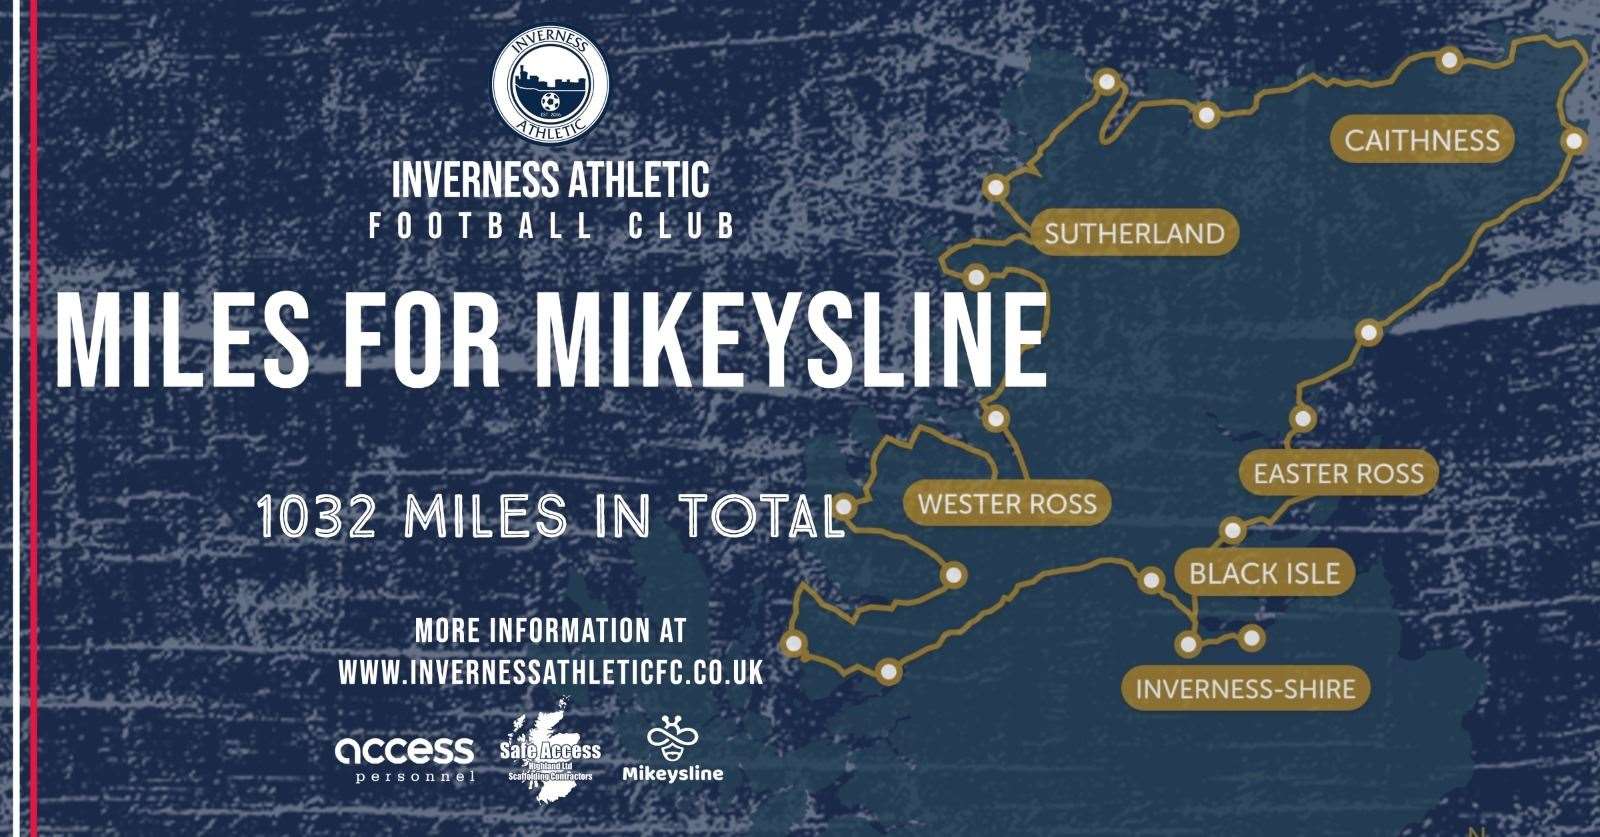 Inverness Athletic are taking part in Miles for Mikeysline.